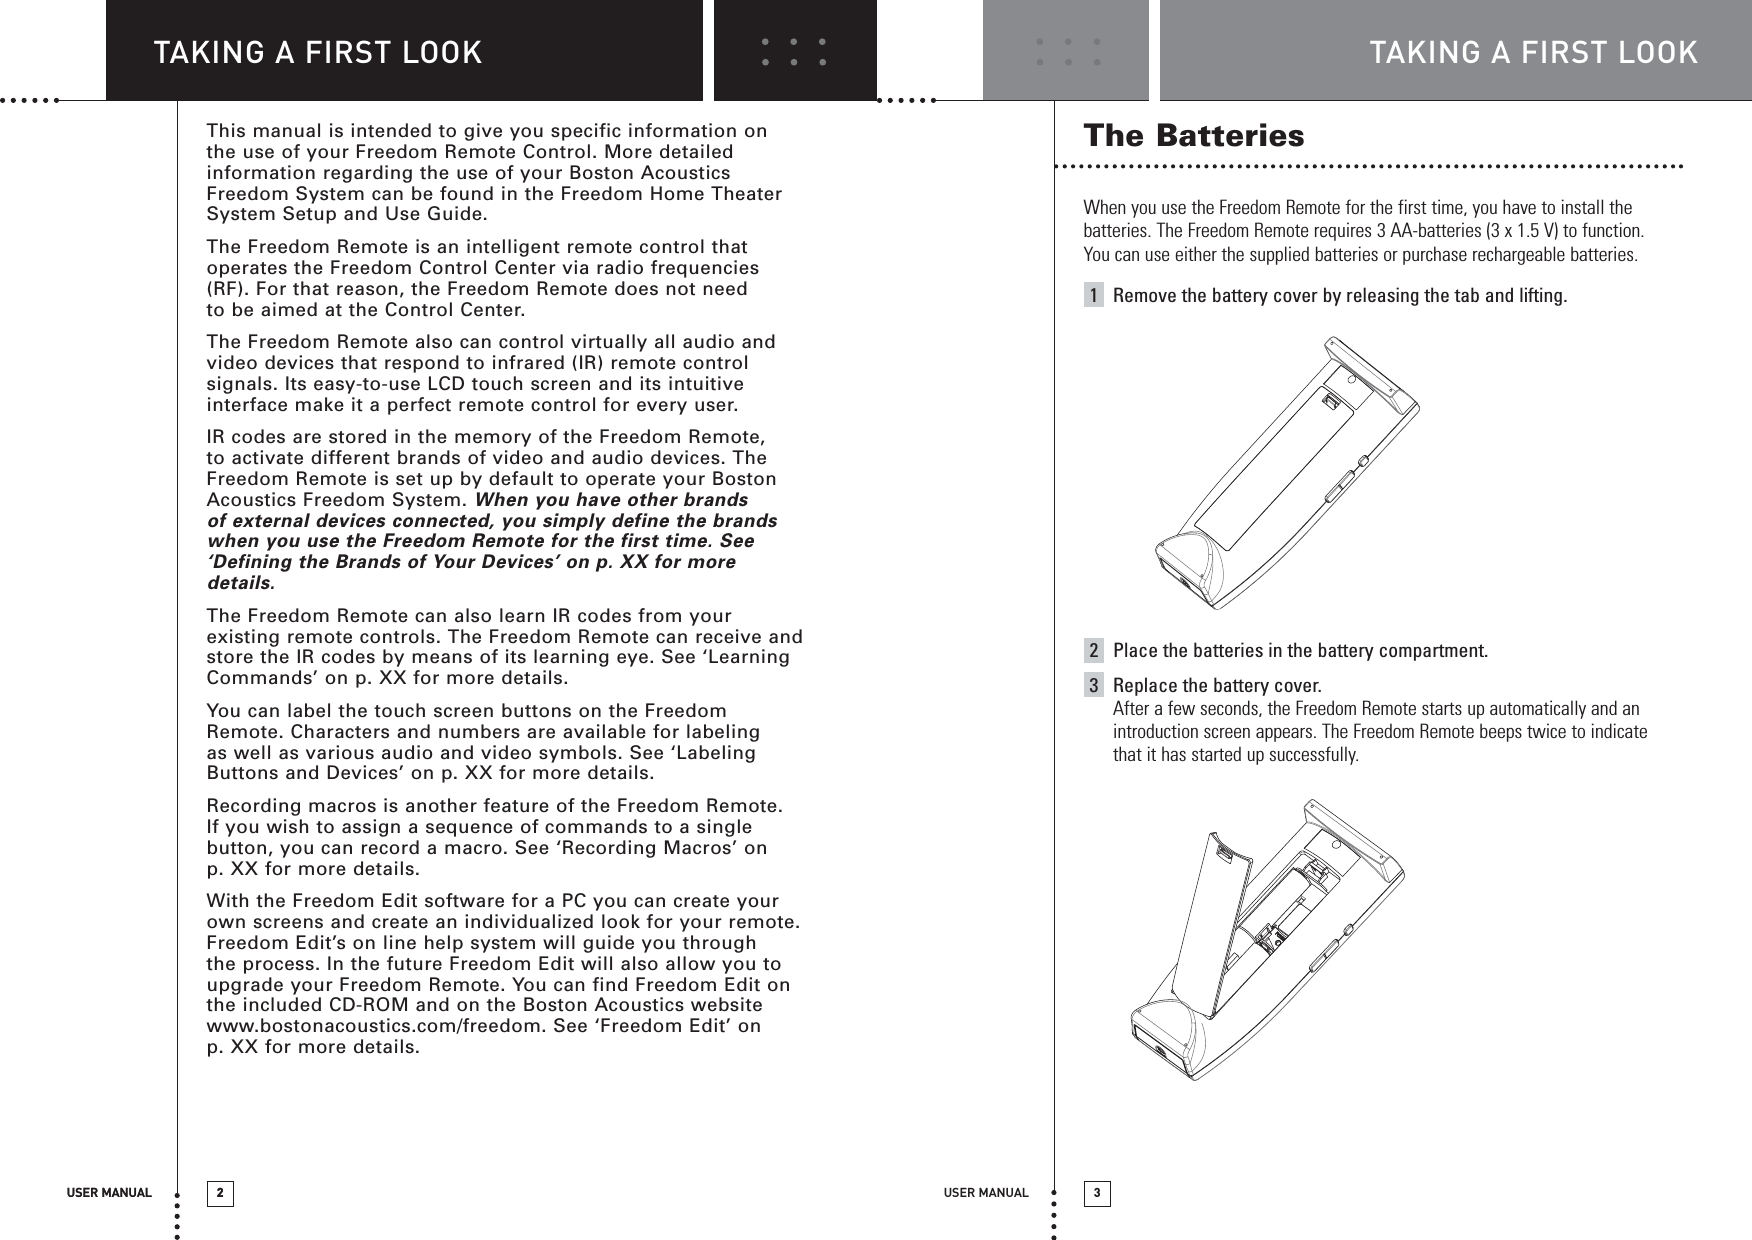 USER MANUAL 3TAKING A FIRST LOOKUSER MANUAL 2TAKING A FIRST LOOKThe BatteriesWhen you use the Freedom Remote for the first time, you have to install thebatteries. The Freedom Remote requires 3 AA-batteries (3 x 1.5 V) to function.You can use either the supplied batteries or purchase rechargeable batteries.1Remove the battery cover by releasing the tab and lifting.2Place the batteries in the battery compartment.3Replace the battery cover.After a few seconds, the Freedom Remote starts up automatically and anintroduction screen appears. The Freedom Remote beeps twice to indicatethat it has started up successfully.USER MANUAL 2This manual is intended to give you specific information on the use of your Freedom Remote Control. More detailedinformation regarding the use of your Boston AcousticsFreedom System can be found in the Freedom Home TheaterSystem Setup and Use Guide.The Freedom Remote is an intelligent remote control thatoperates the Freedom Control Center via radio frequencies(RF). For that reason, the Freedom Remote does not need to be aimed at the Control Center. The Freedom Remote also can control virtually all audio andvideo devices that respond to infrared (IR) remote controlsignals. Its easy-to-use LCD touch screen and its intuitiveinterface make it a perfect remote control for every user.IR codes are stored in the memory of the Freedom Remote, to activate different brands of video and audio devices. TheFreedom Remote is set up by default to operate your BostonAcoustics Freedom System. When you have other brands of external devices connected, you simply define the brandswhen you use the Freedom Remote for the first time. See‘Defining the Brands of Your Devices’ on p. XX for moredetails.The Freedom Remote can also learn IR codes from yourexisting remote controls. The Freedom Remote can receive andstore the IR codes by means of its learning eye. See ‘LearningCommands’ on p. XX for more details.You can label the touch screen buttons on the FreedomRemote. Characters and numbers are available for labelingas well as various audio and video symbols. See ‘LabelingButtons and Devices’ on p. XX for more details.Recording macros is another feature of the Freedom Remote. If you wish to assign a sequence of commands to a singlebutton, you can record a macro. See ‘Recording Macros’ on p. XX for more details.With the Freedom Edit software for a PC you can create yourown screens and create an individualized look for your remote.Freedom Edit’s on line help system will guide you through the process. In the future Freedom Edit will also allow you toupgrade your Freedom Remote. You can find Freedom Edit onthe included CD-ROM and on the Boston Acoustics websitewww.bostonacoustics.com/freedom. See ‘Freedom Edit’ on p. XX for more details.